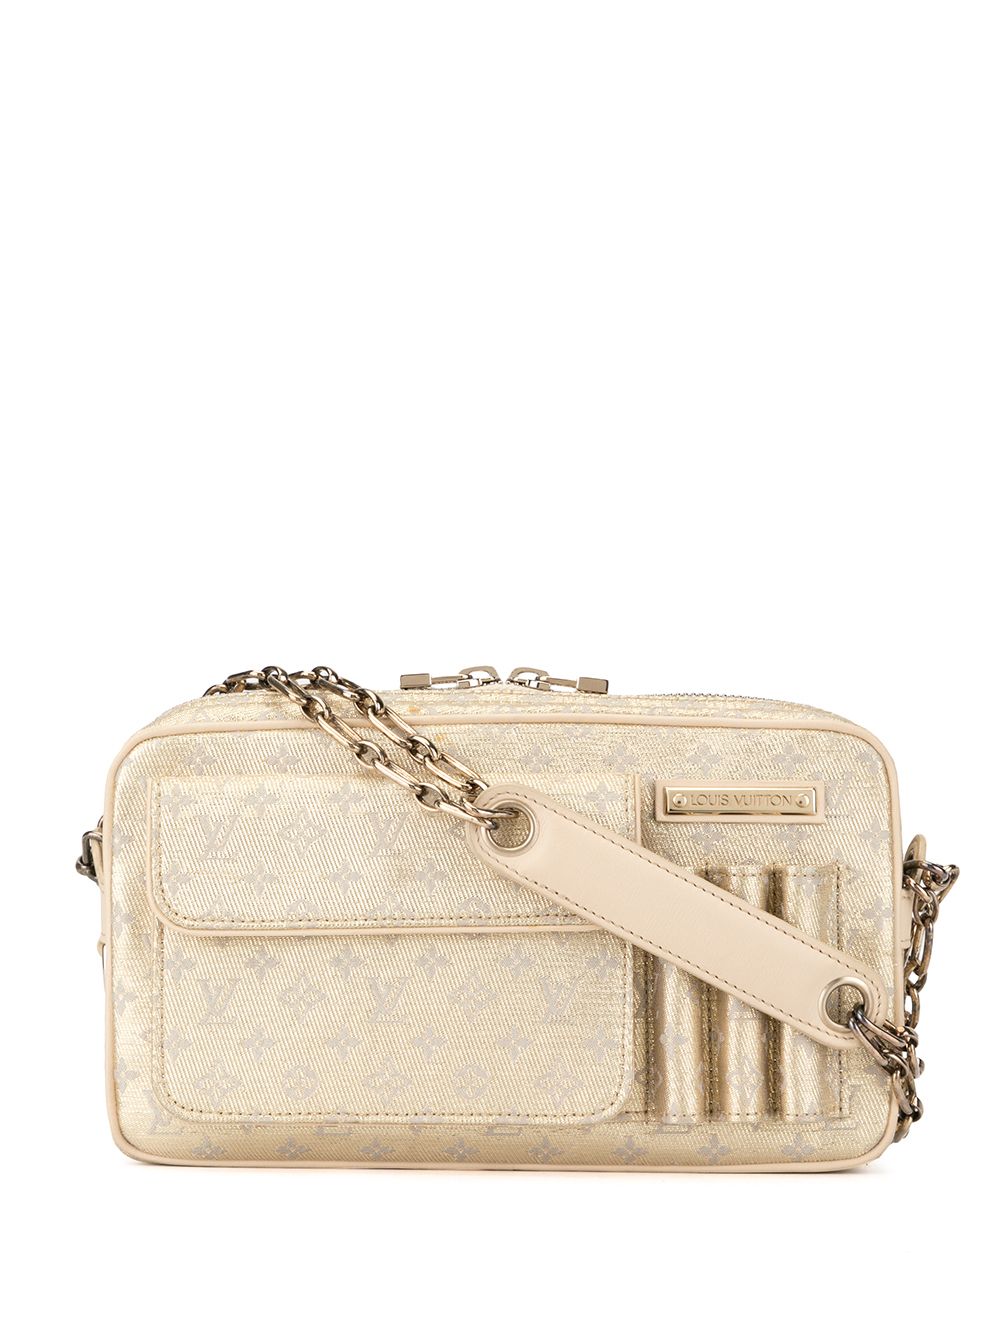 Pre-Owned Louis Vuitton Mckenna Chain Shoulder Bag In Gold | ModeSens